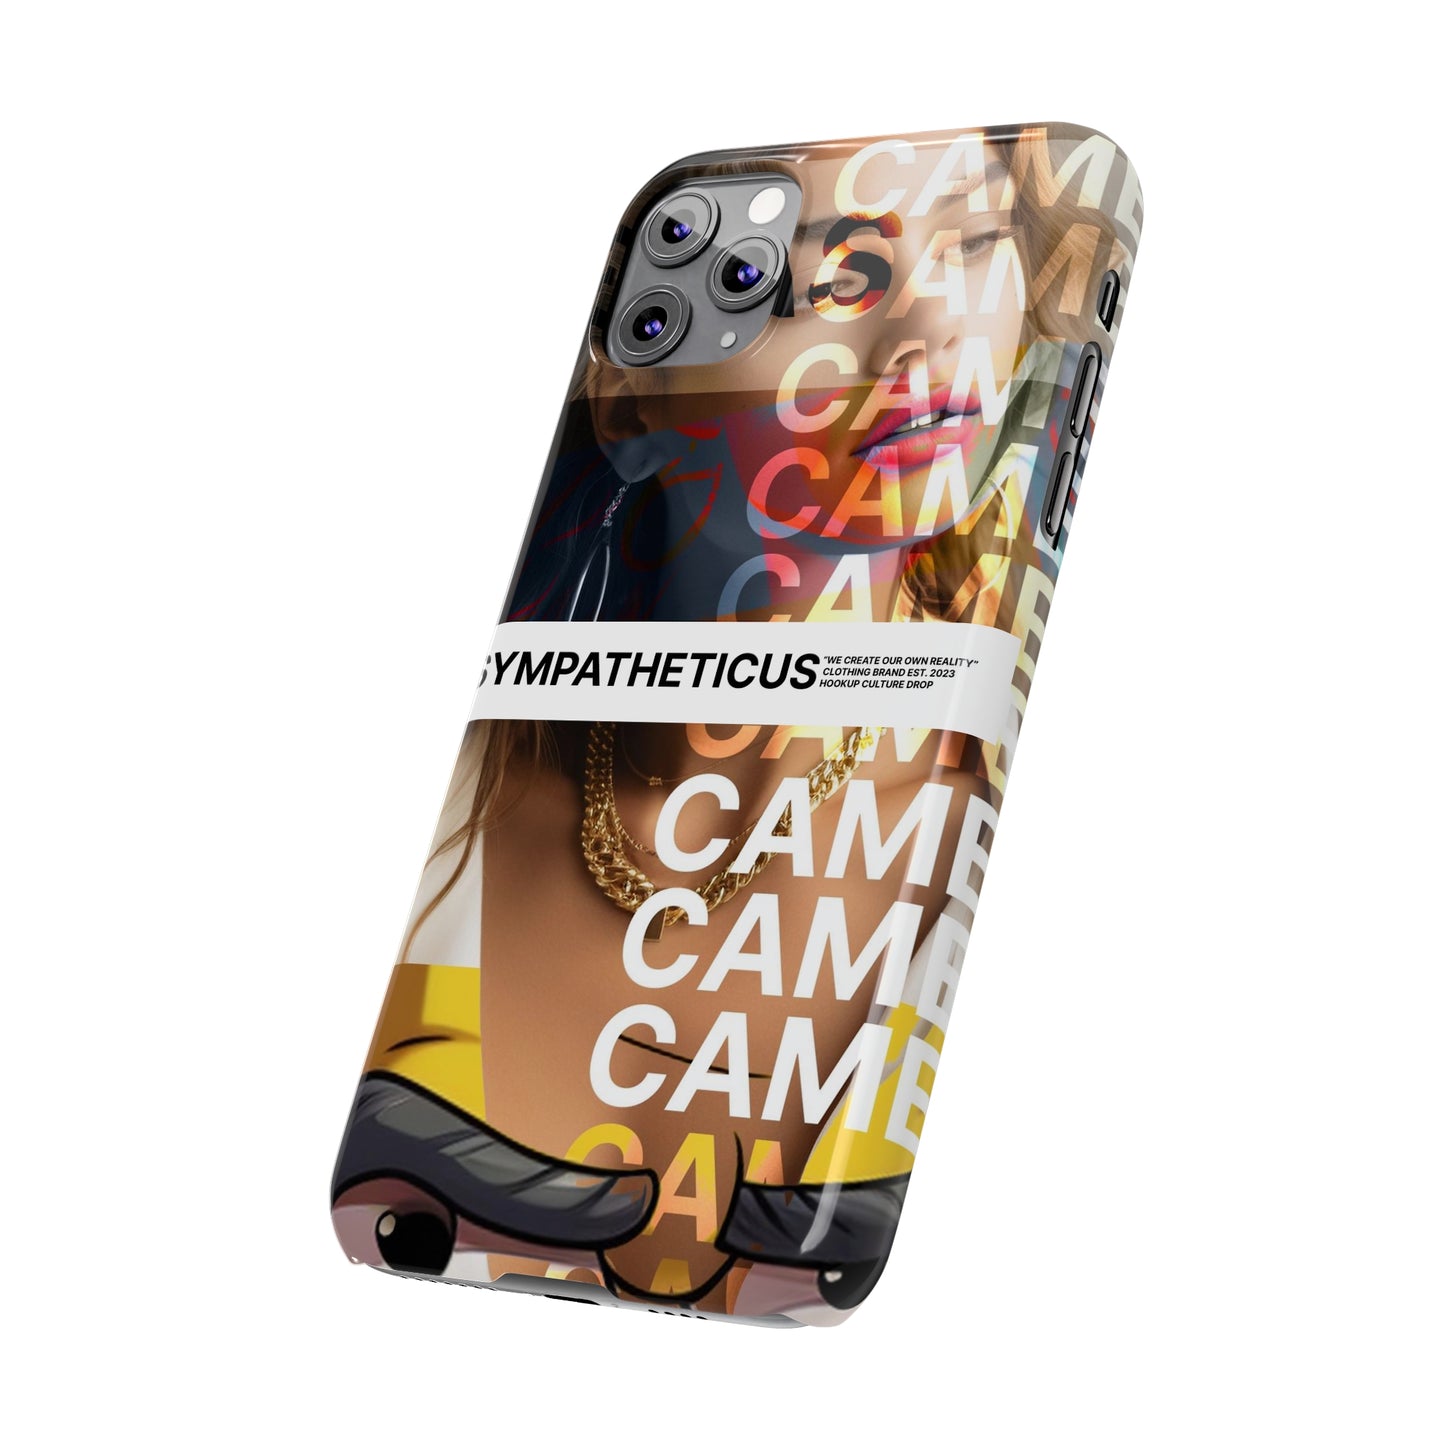 Hookup culture special iphone case-01